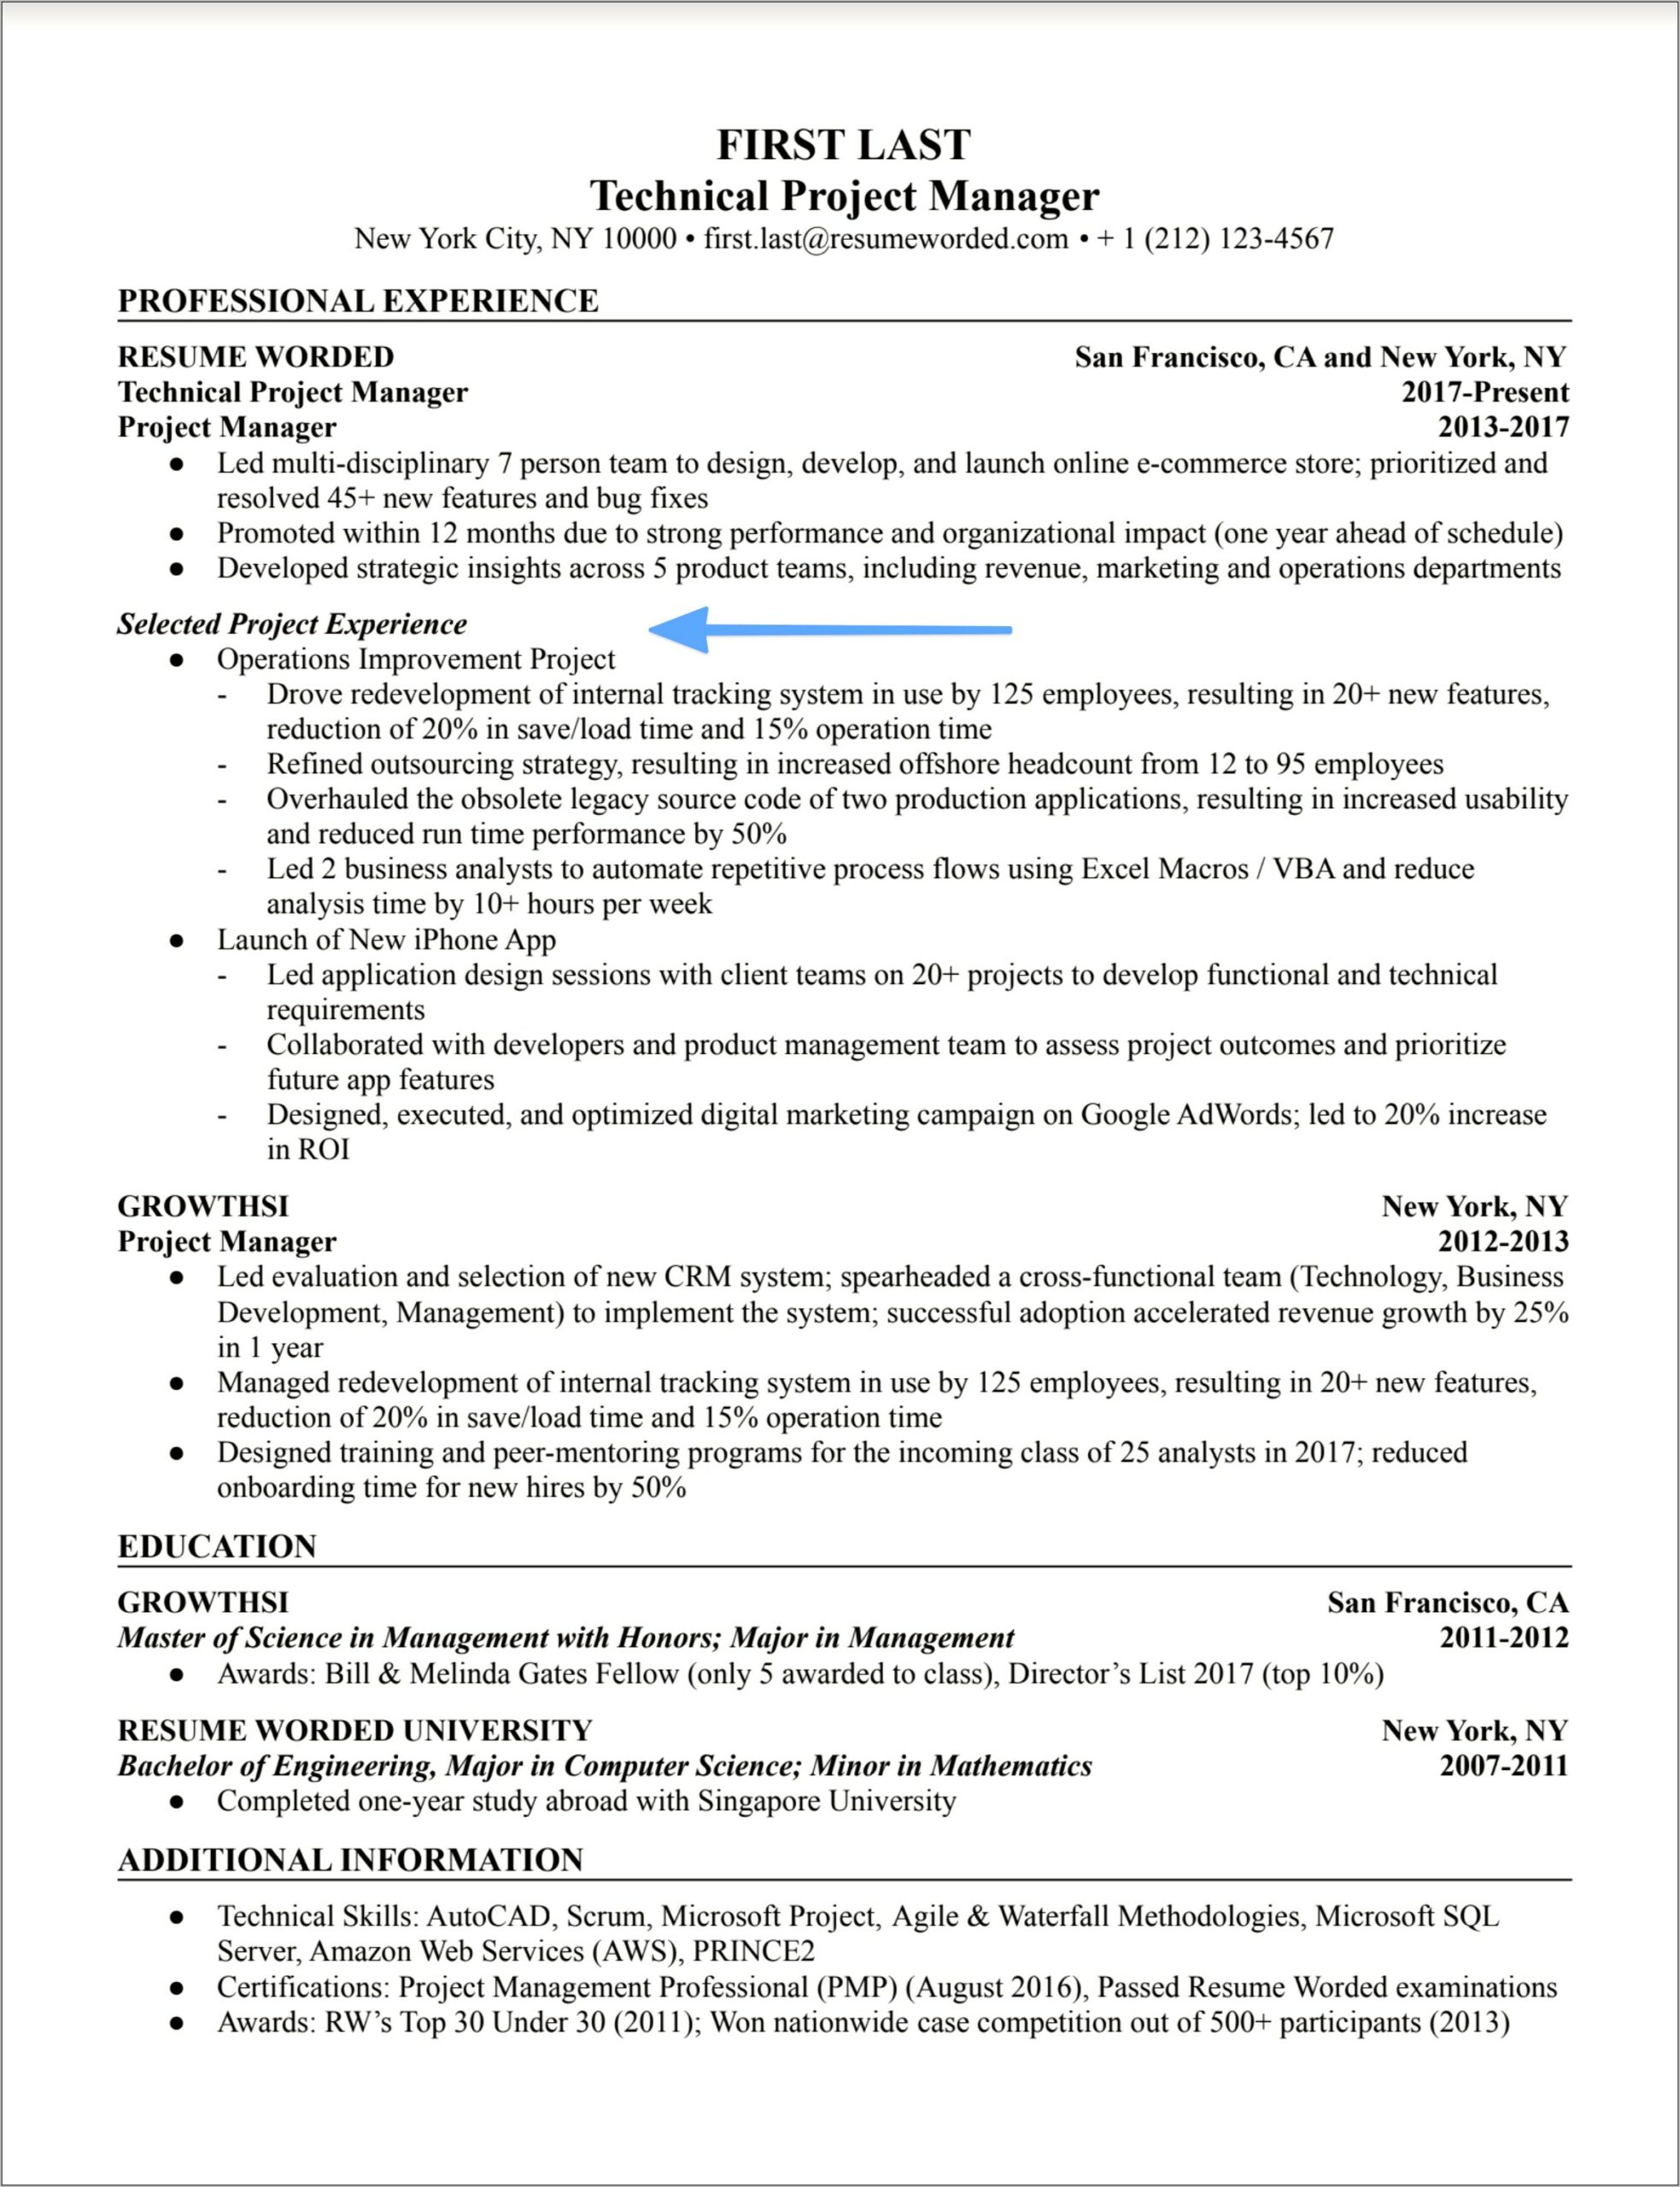 Is Project Managemtn A Resume Skill